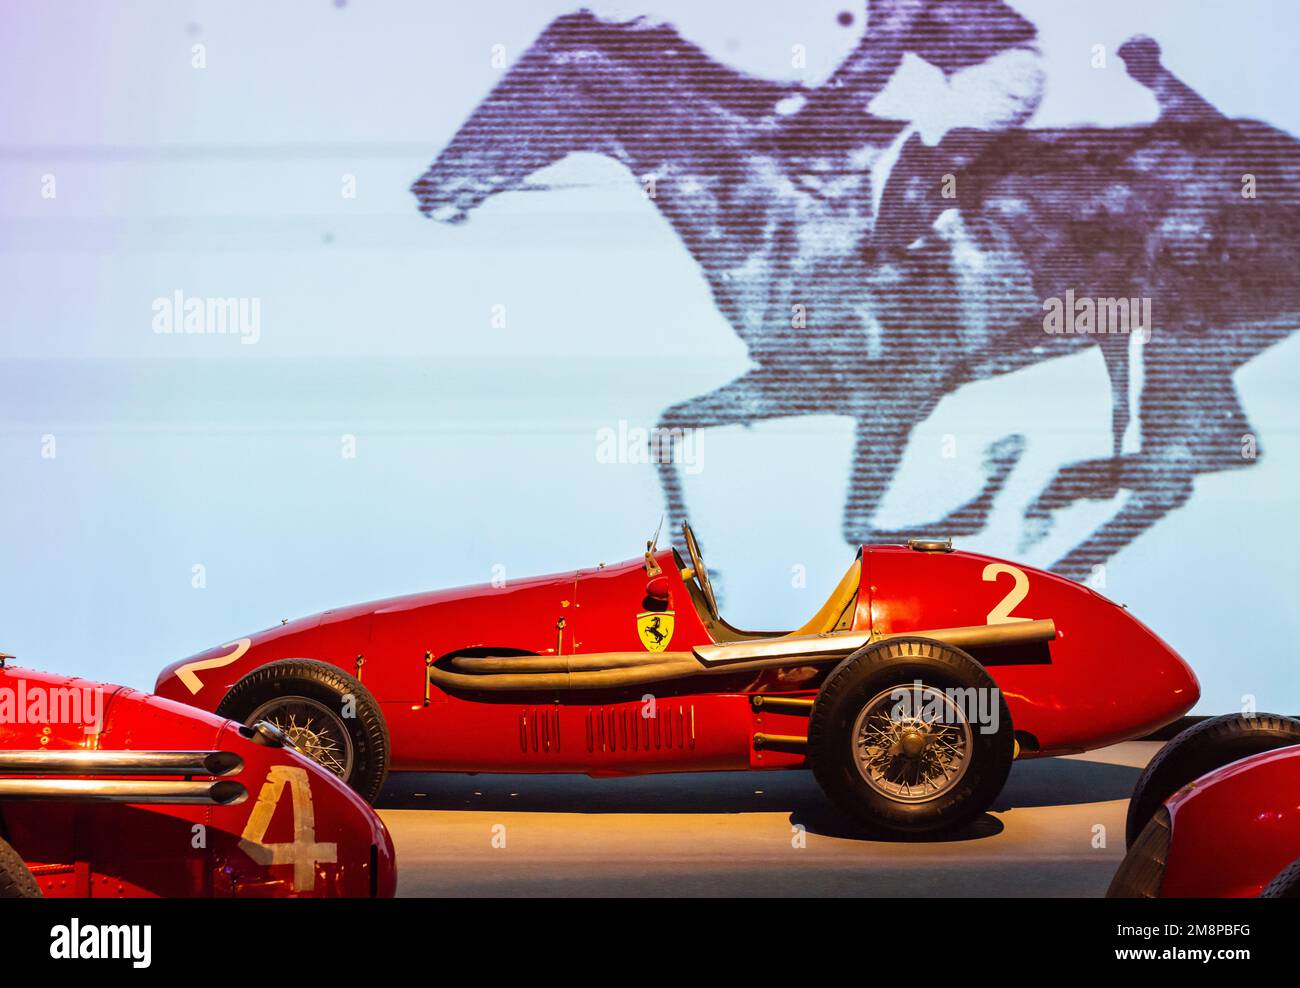 National Car Museum in Turin (MAUTO): Collection of about 200 original vintage cars of 80 different brands. Turin,Piedmont,Italy - The Ferrari 500 F2 Stock Photo